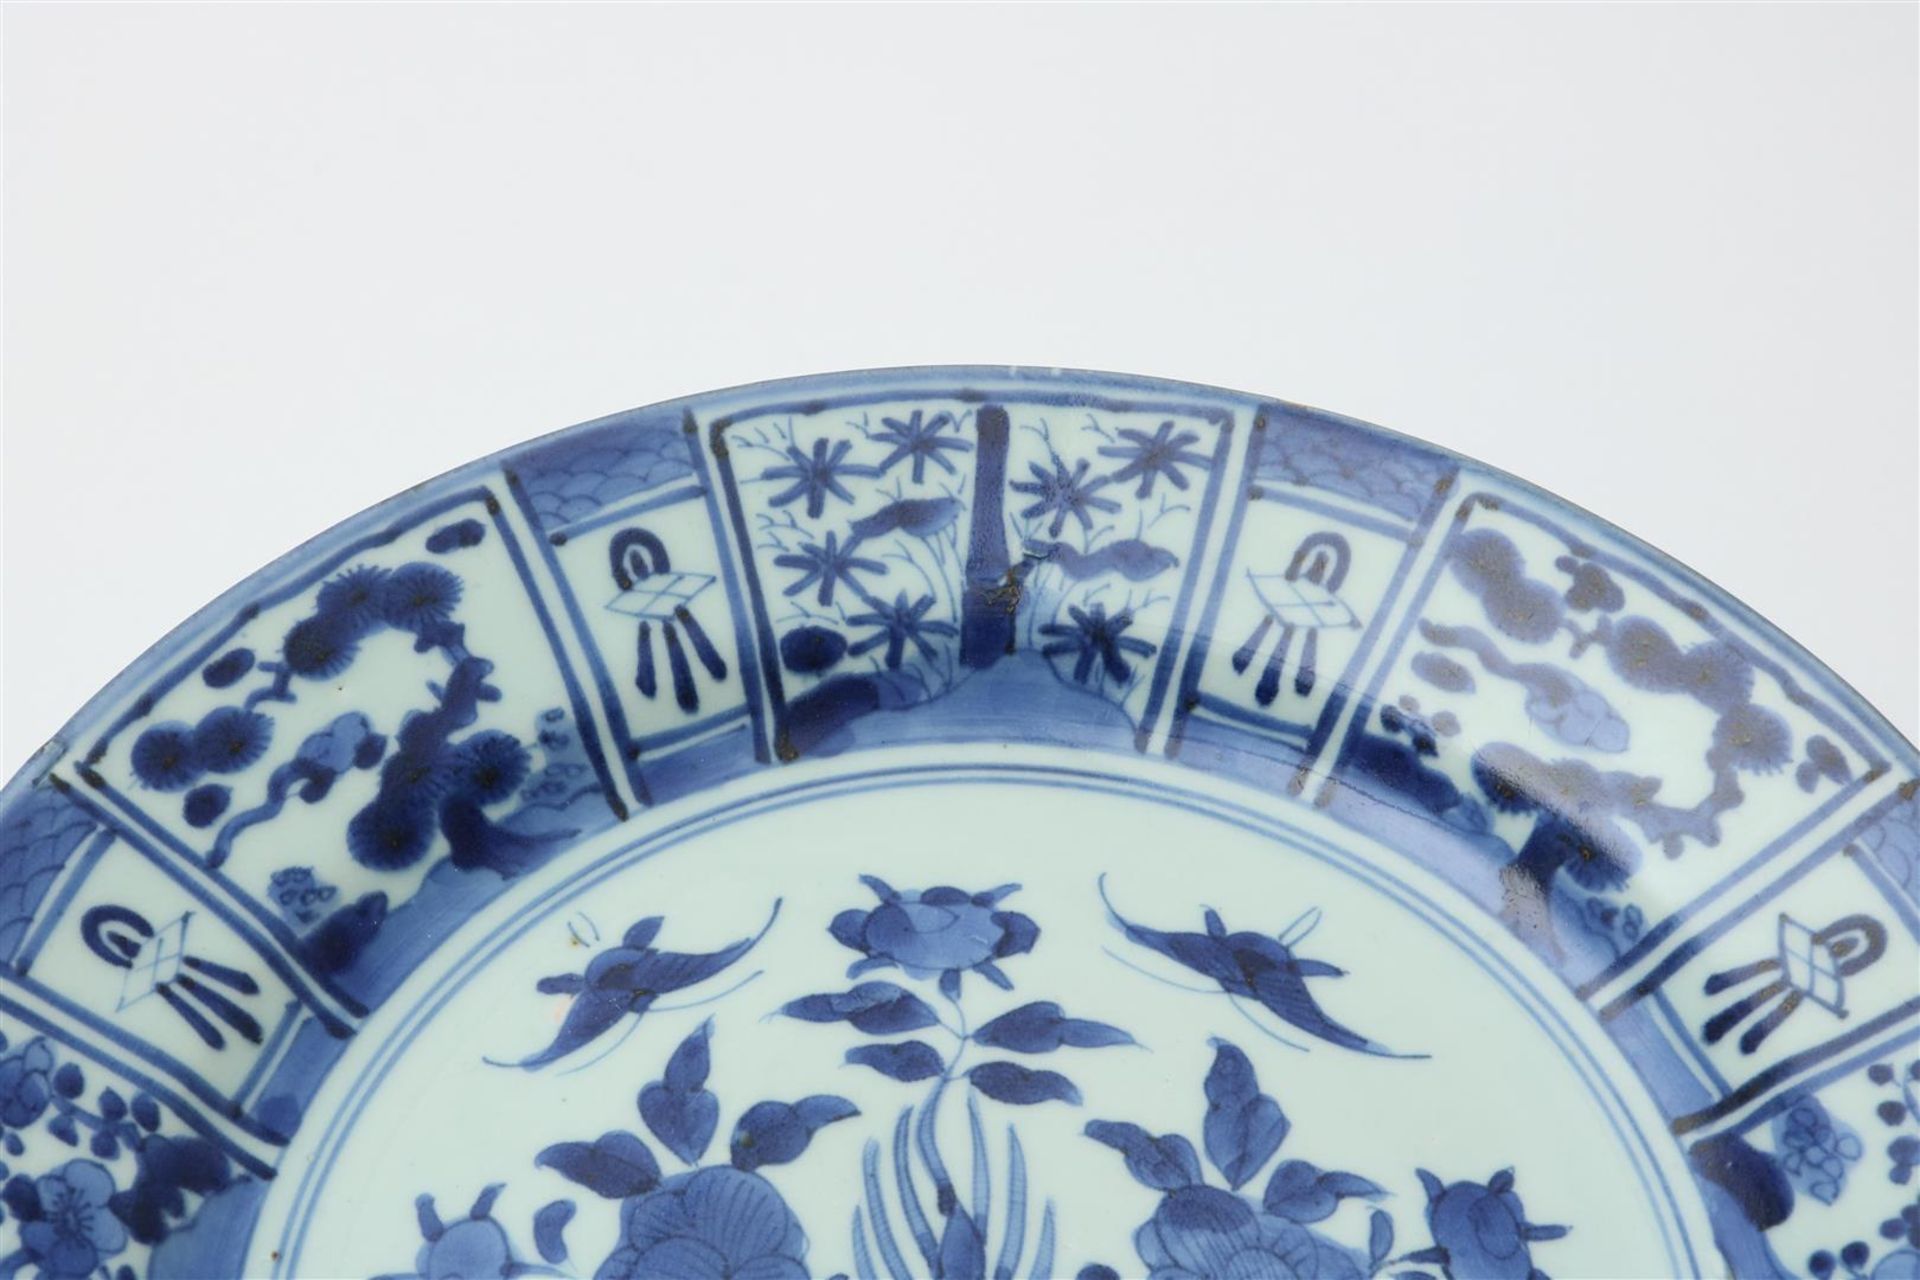 Porcelain Arita dish with central decoration of flowers in vase and cartouche edge decoration, - Image 2 of 5